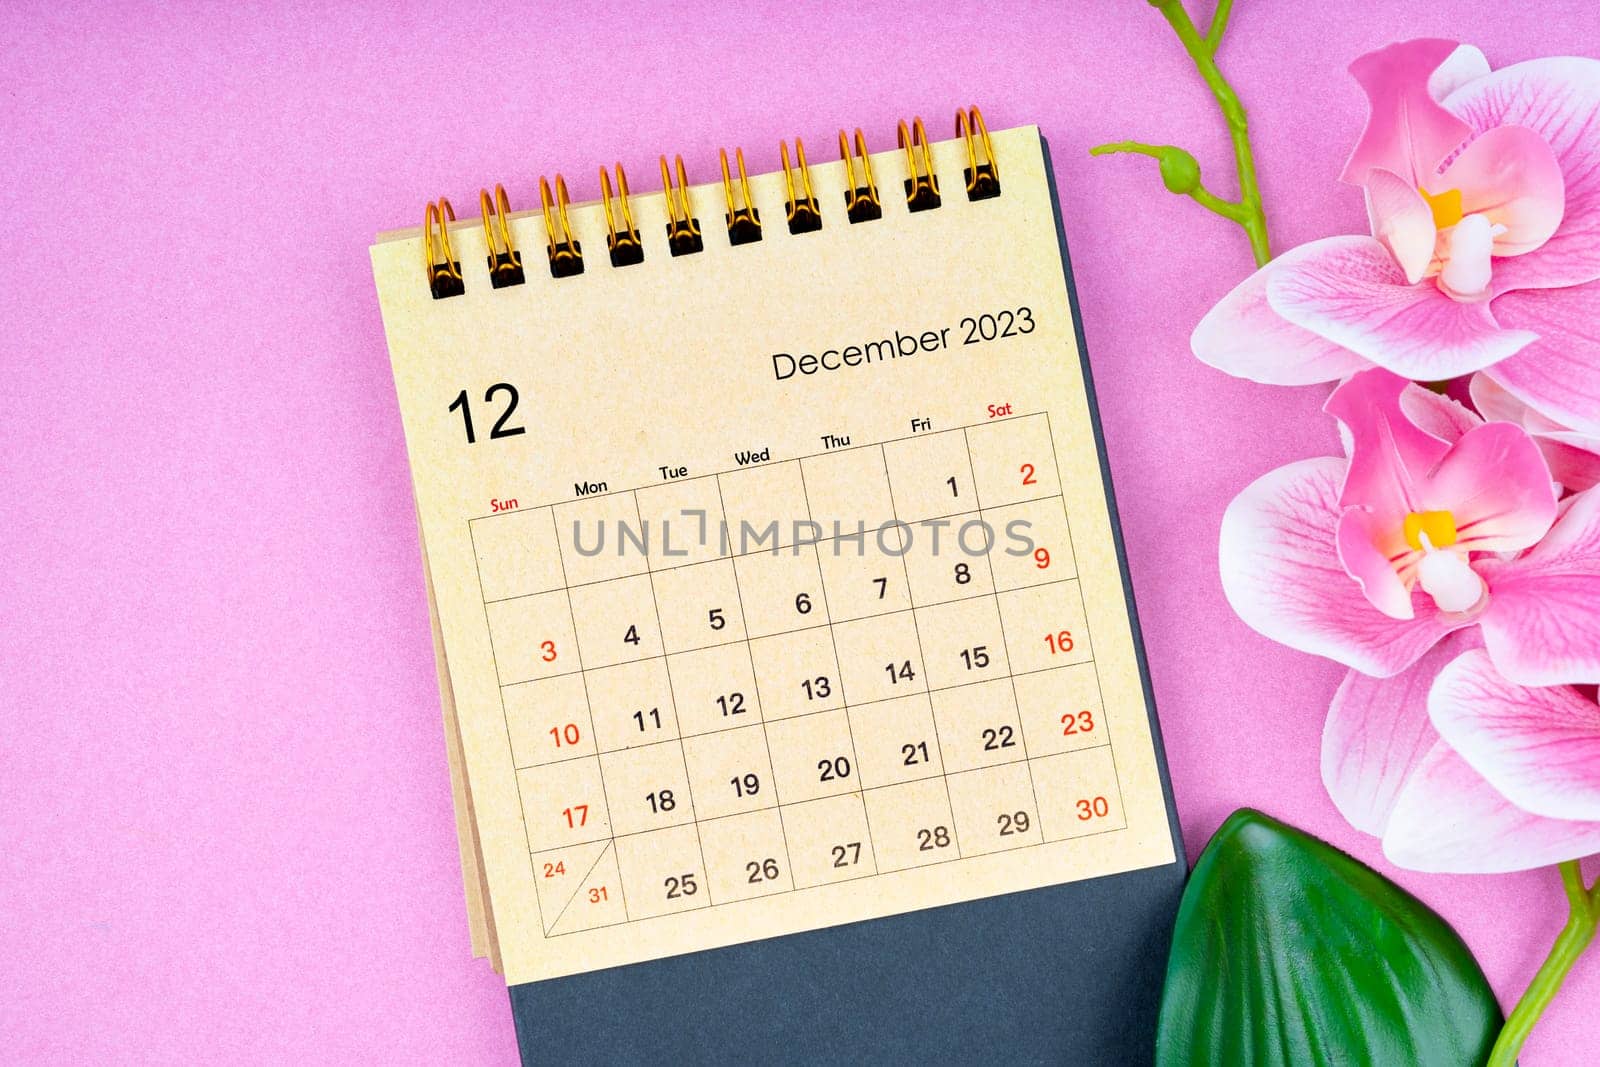 The December 2023 calendar desk and pink orchid on pink background. by Gamjai